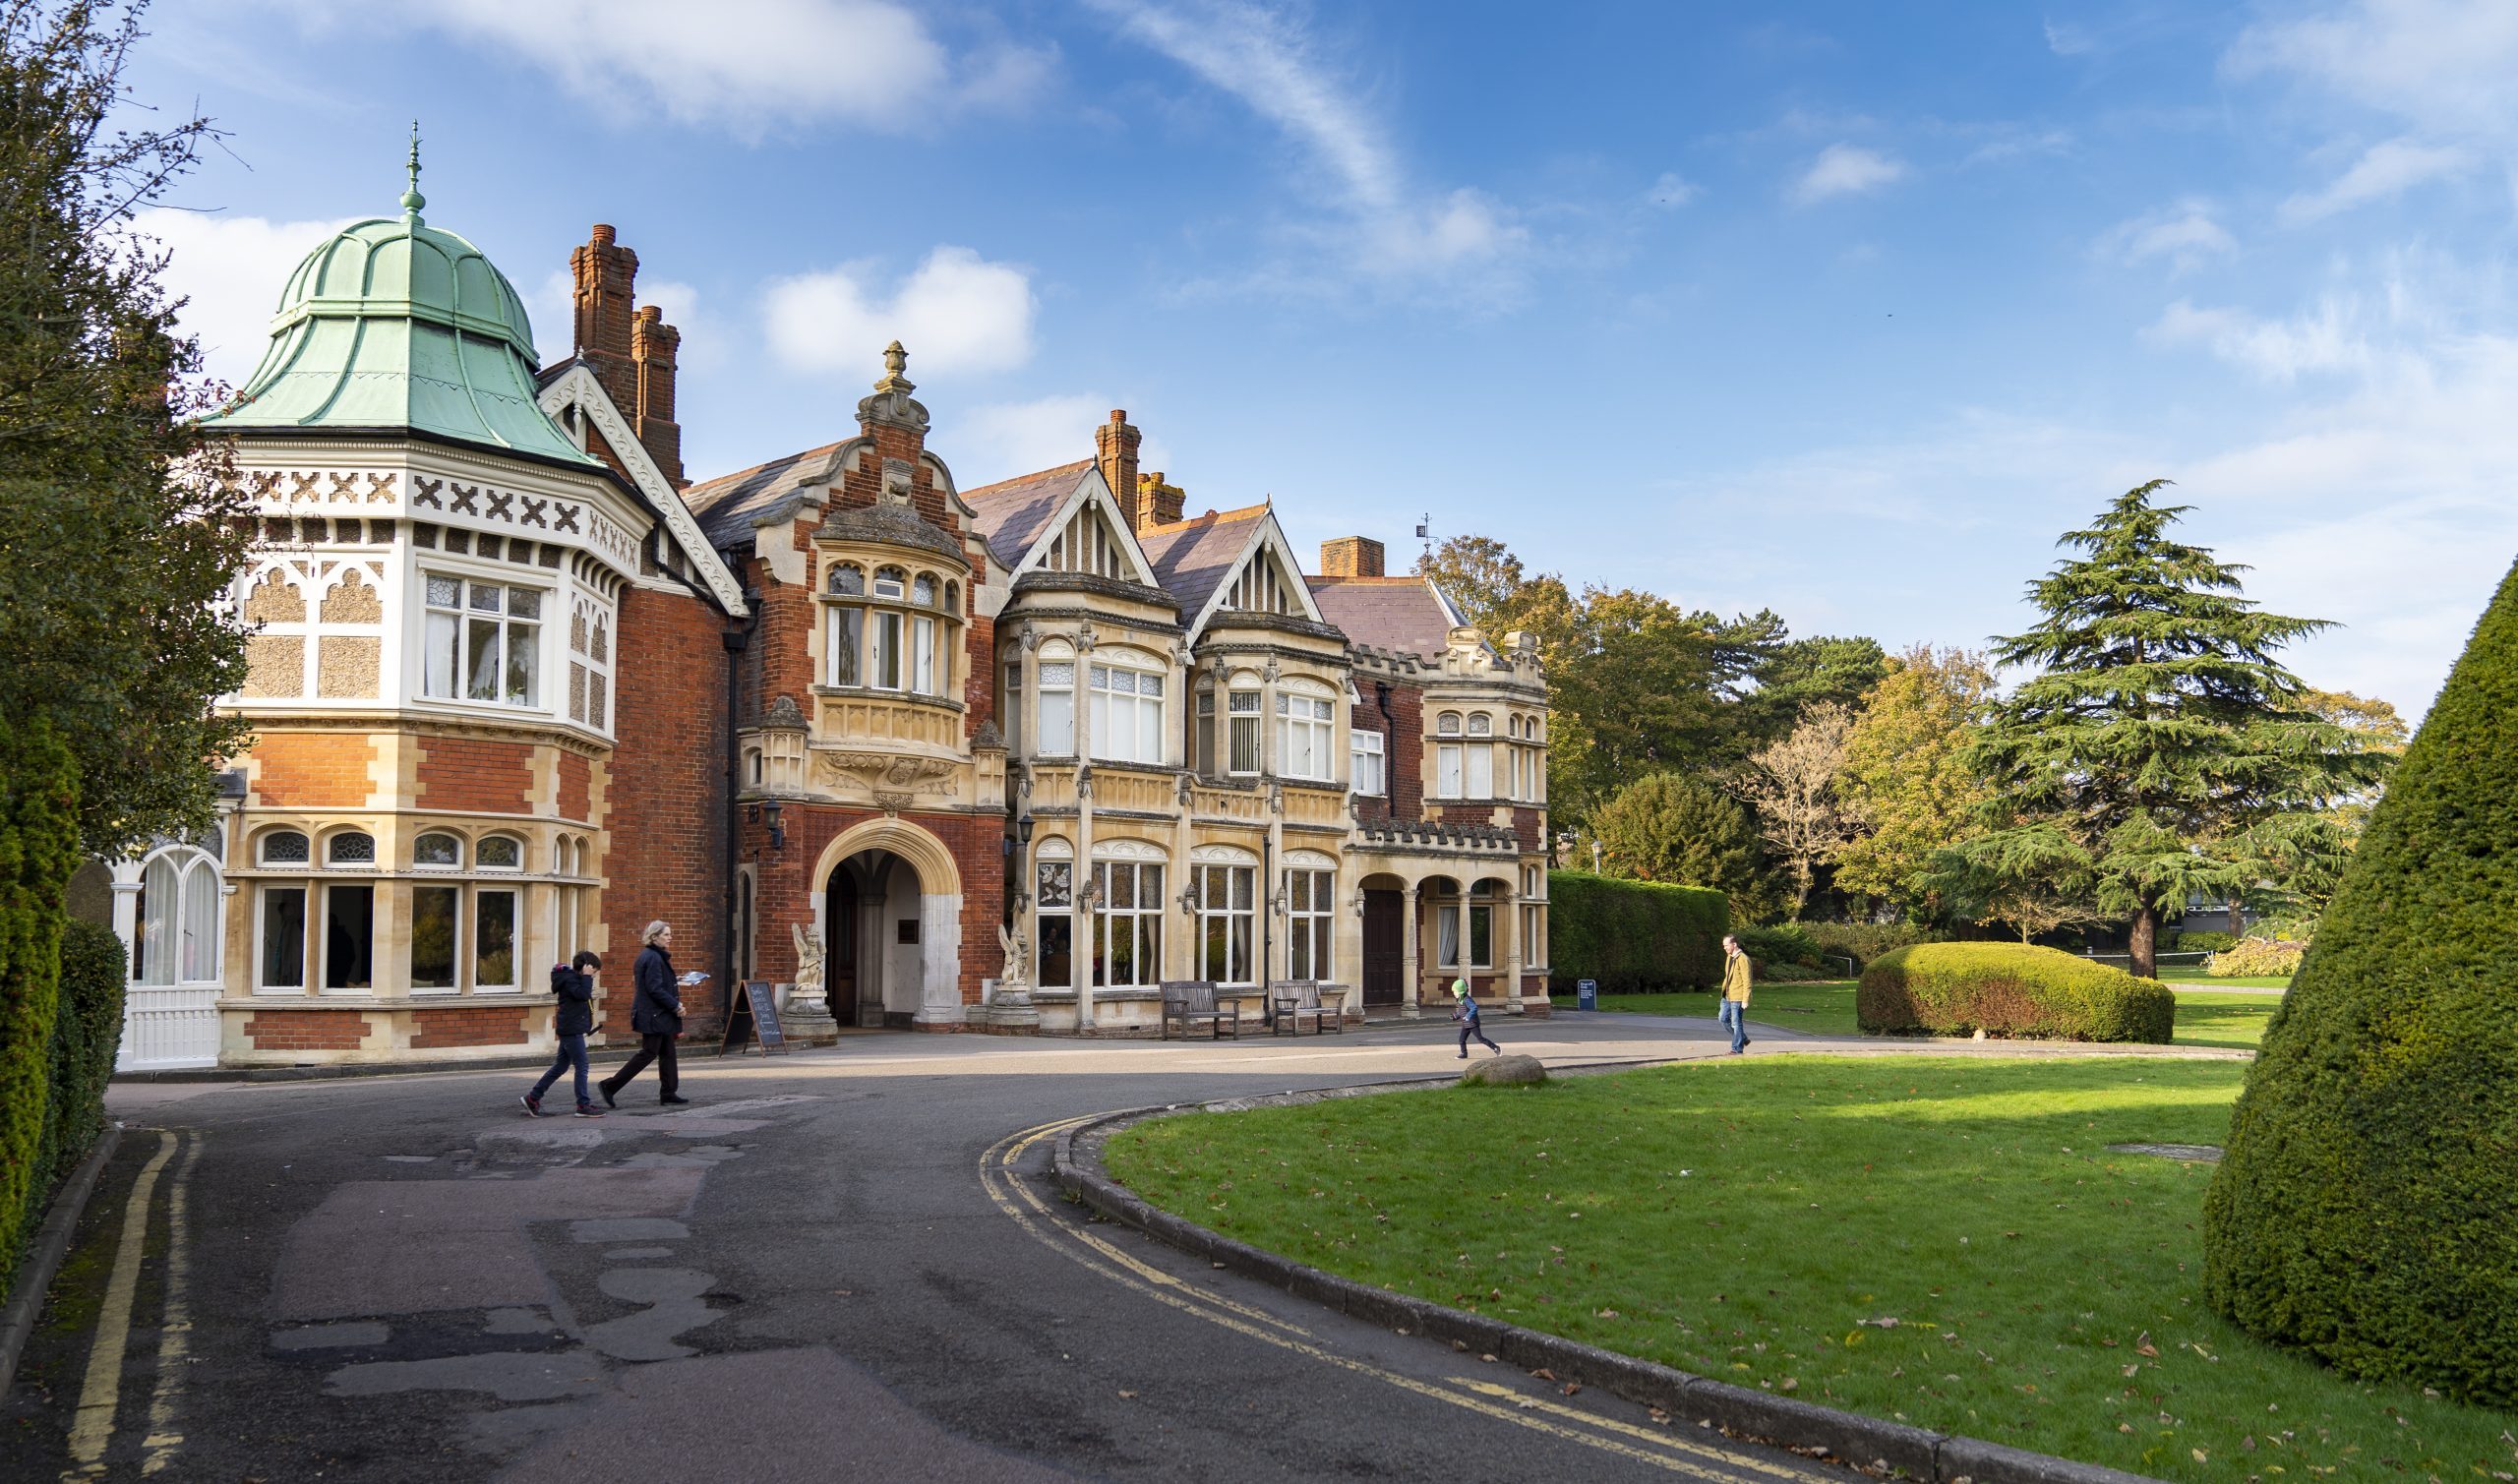 The AI Safety Summit is being held at the historic Bletchley Park Mansion